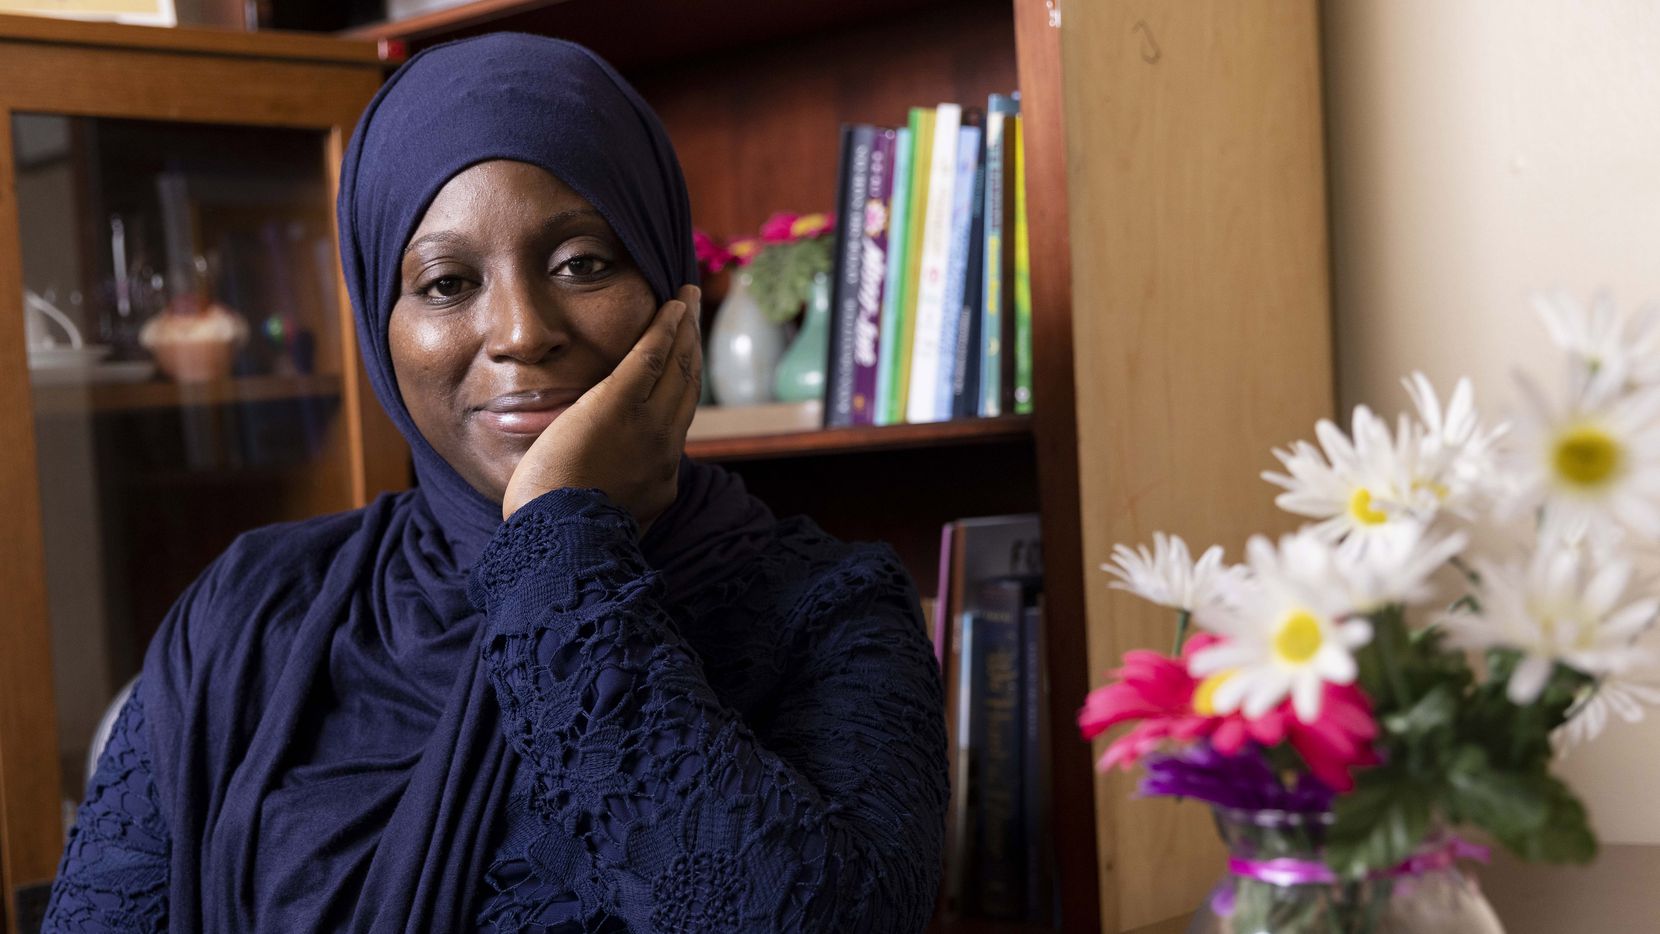 This Dallas writer started a publishing house and festival to spotlight Muslim authors